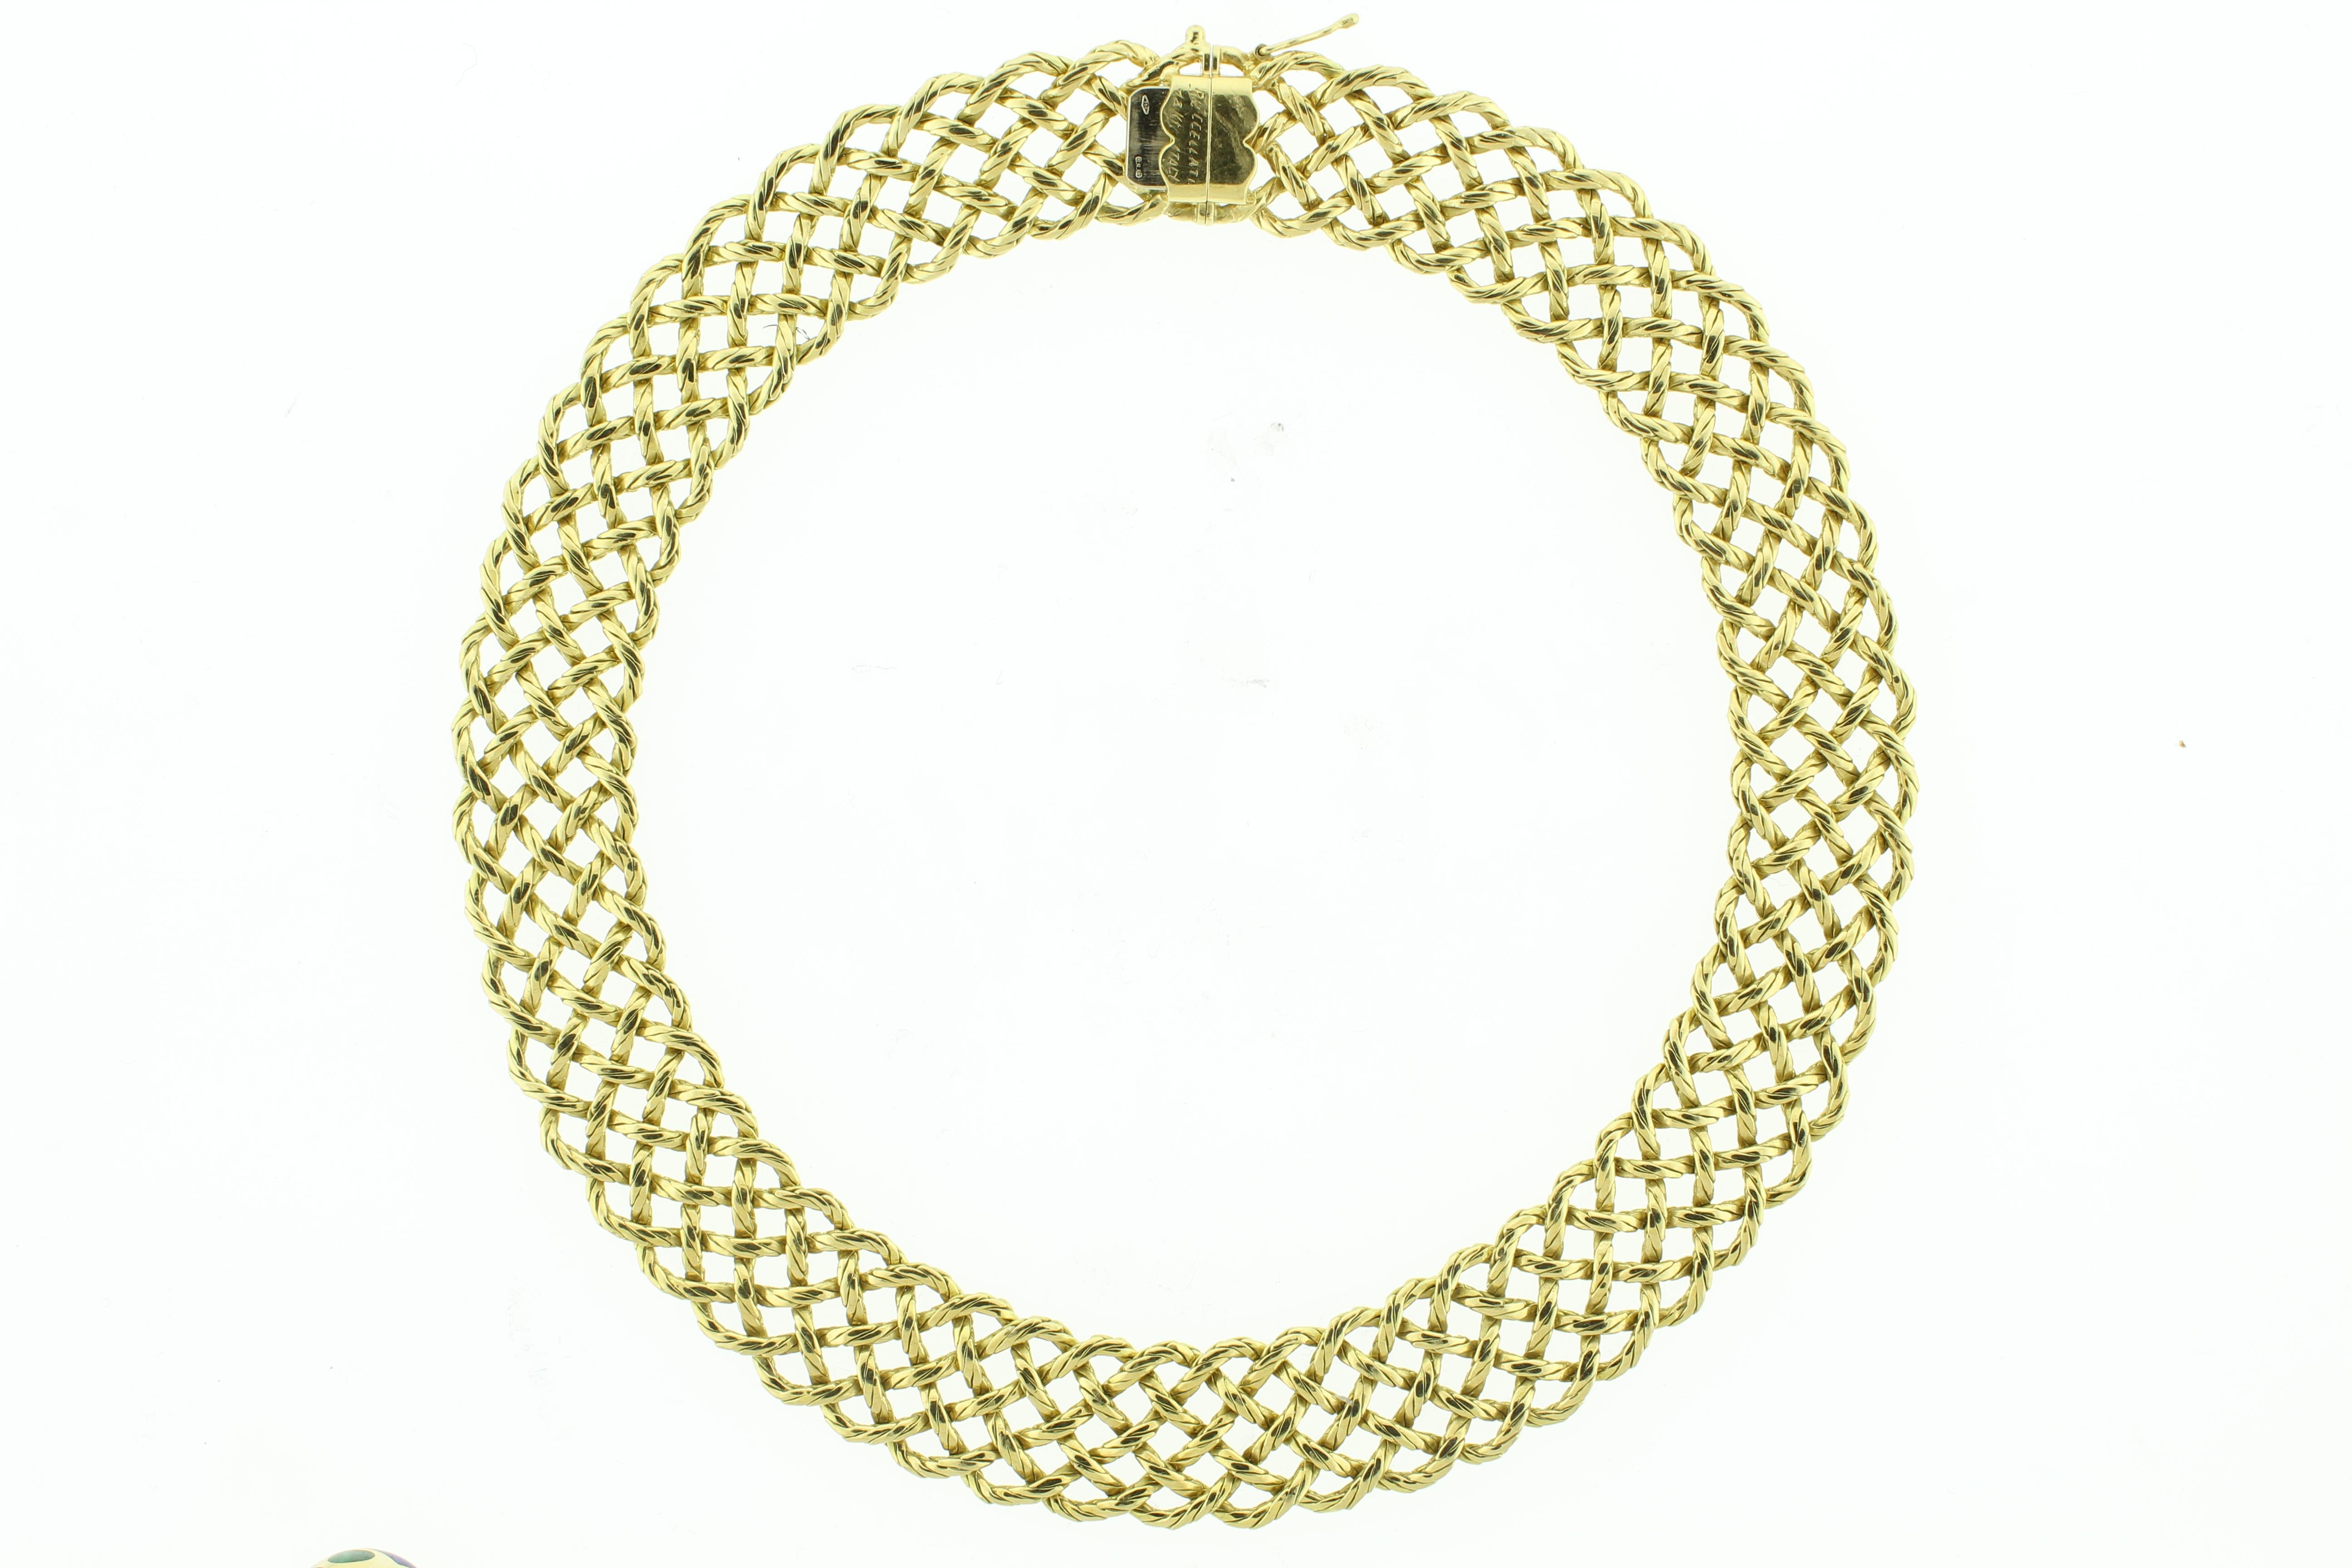 This beautiful necklace is 16 inches in length and in like new condition.
♦ Designer: Buccellati
♦ Metal: 18kt yellow gold 
♦ Circa: 2022
♦ Length: 16 inches
♦ Packaging: Pampillonia Presentation Box
♦ Condition: Excellent , like new condition